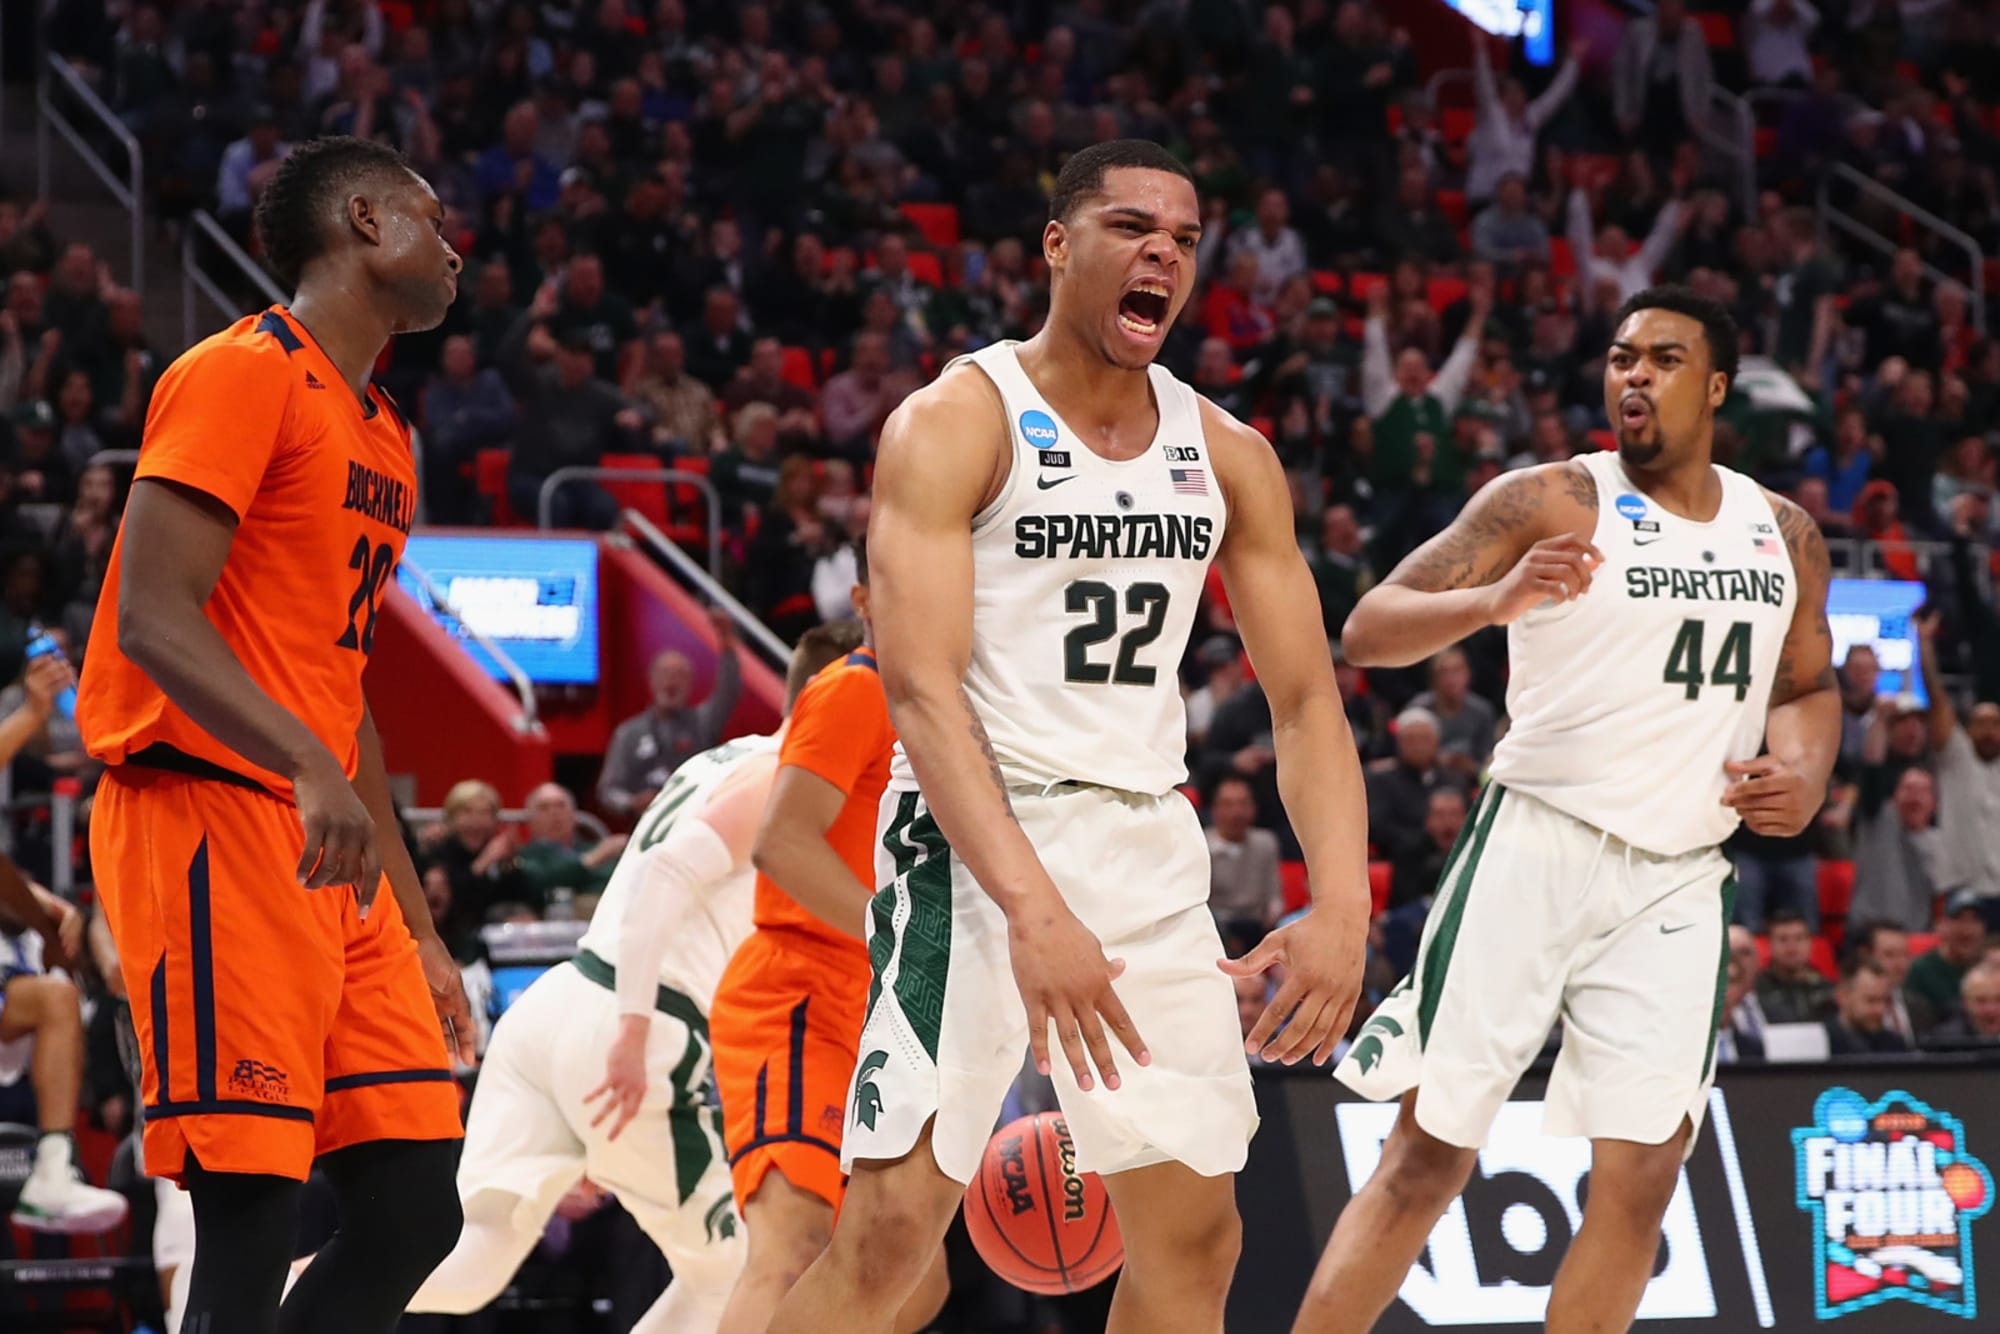 Miles Bridges is playing the best basketball of his NBA career